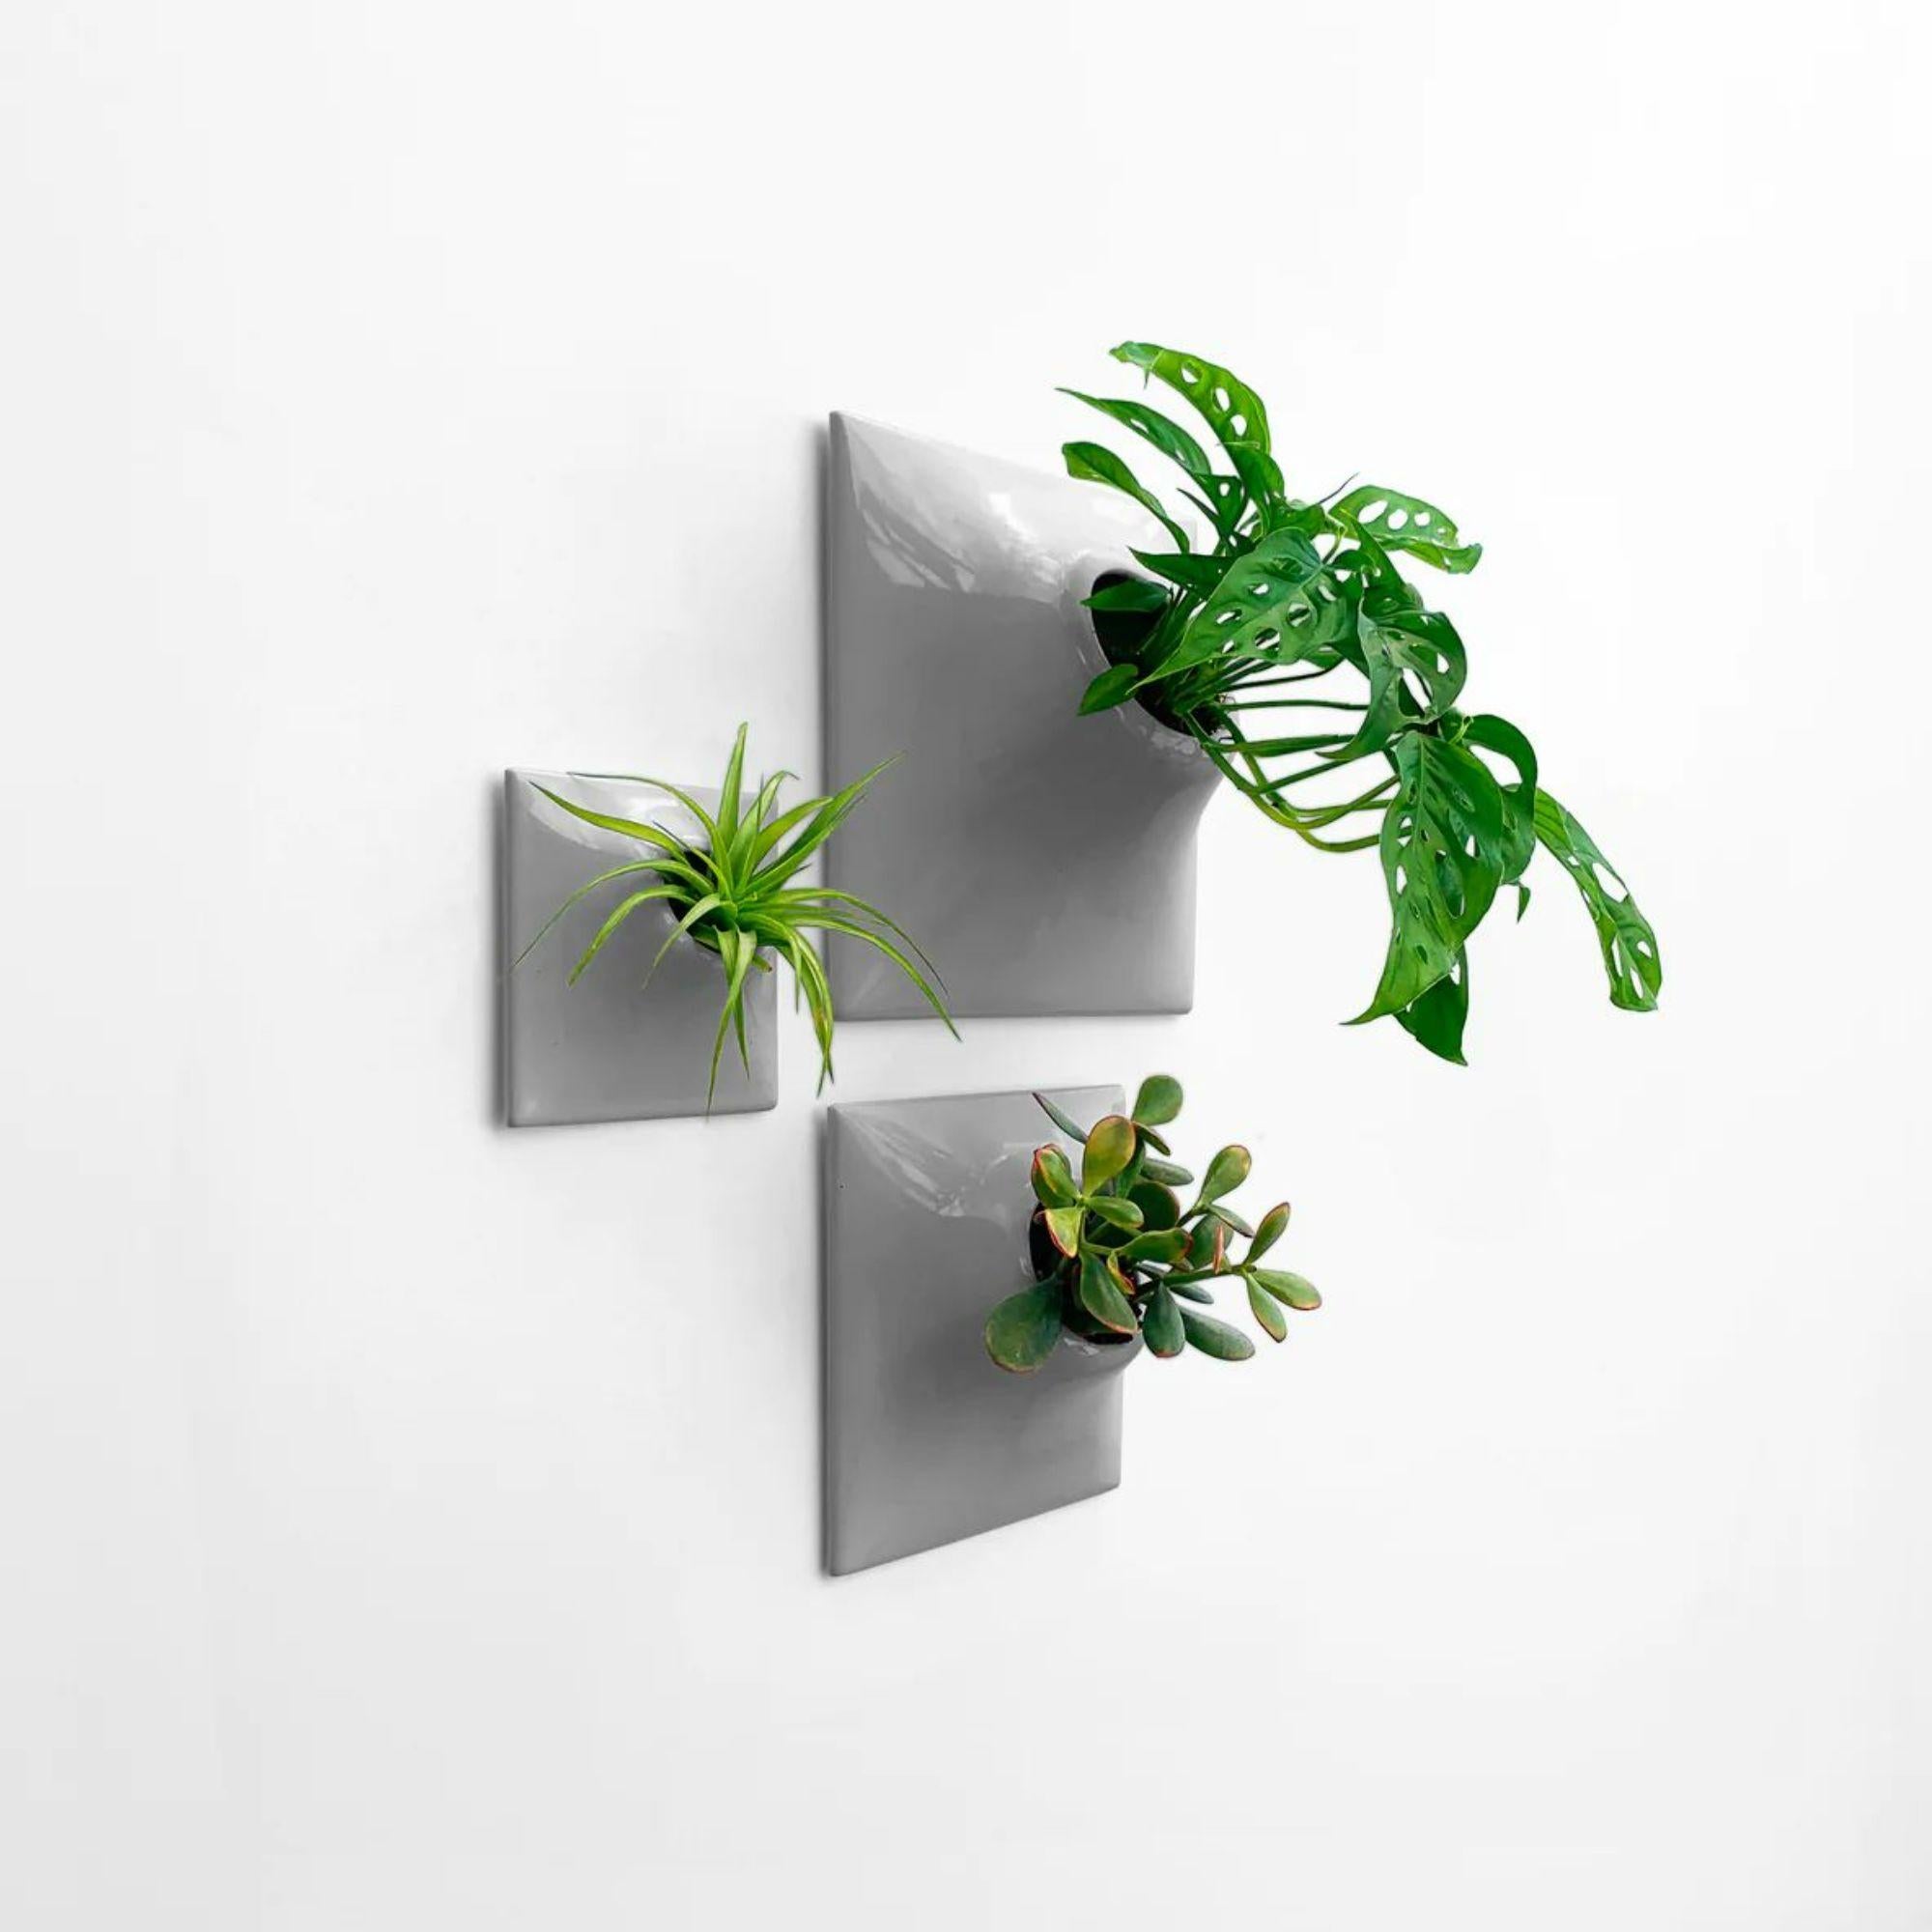 Modern Gray Wall Planter Set, Mid Century Modern Decor, Plant Wall Art, Node TPM

Take your modern wall art to the next level by creating a dynamic and intriguing living wall or modular plant wall in your home or office with this Node Wall Planter